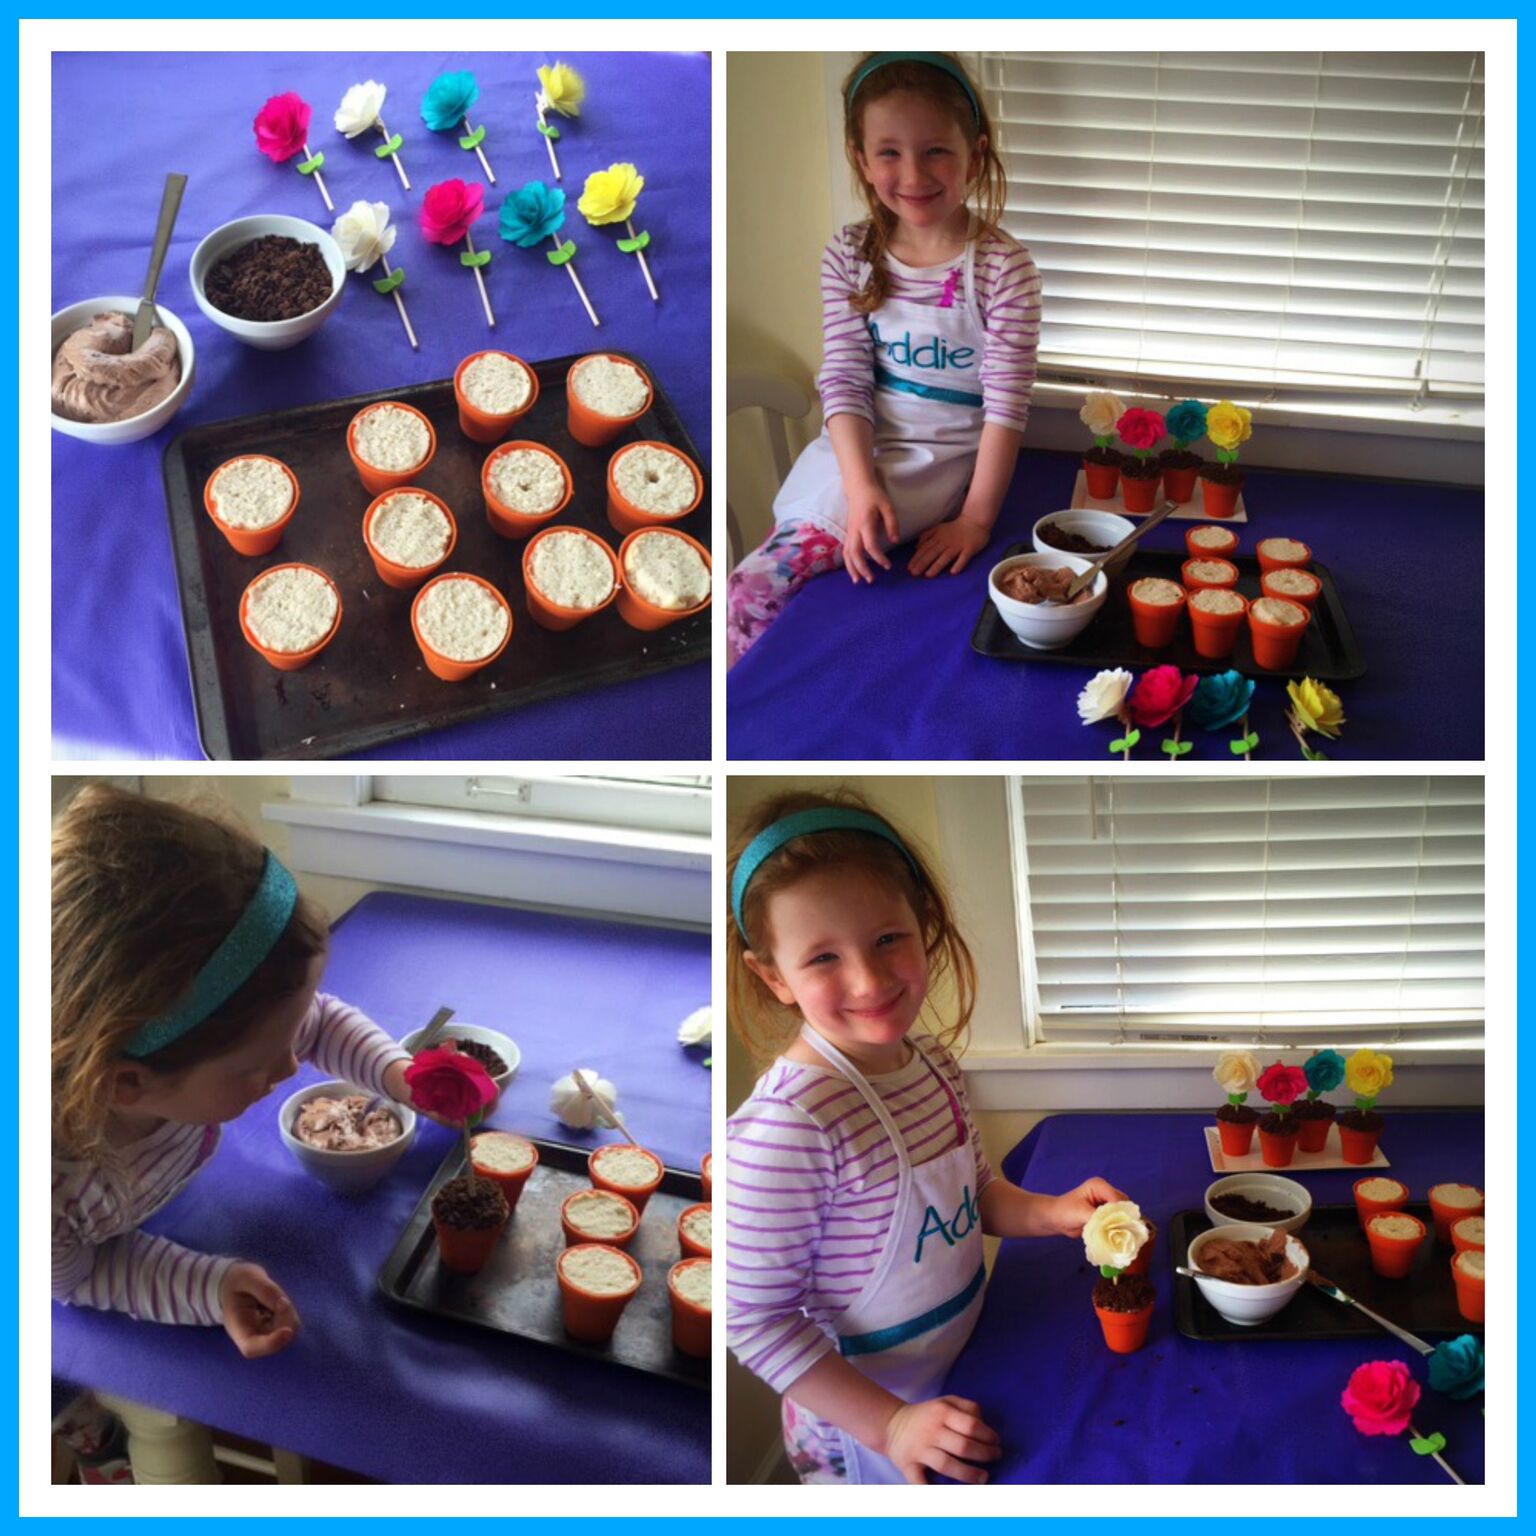 CELEBRATE WITH FLOWER POT CUPCAKES